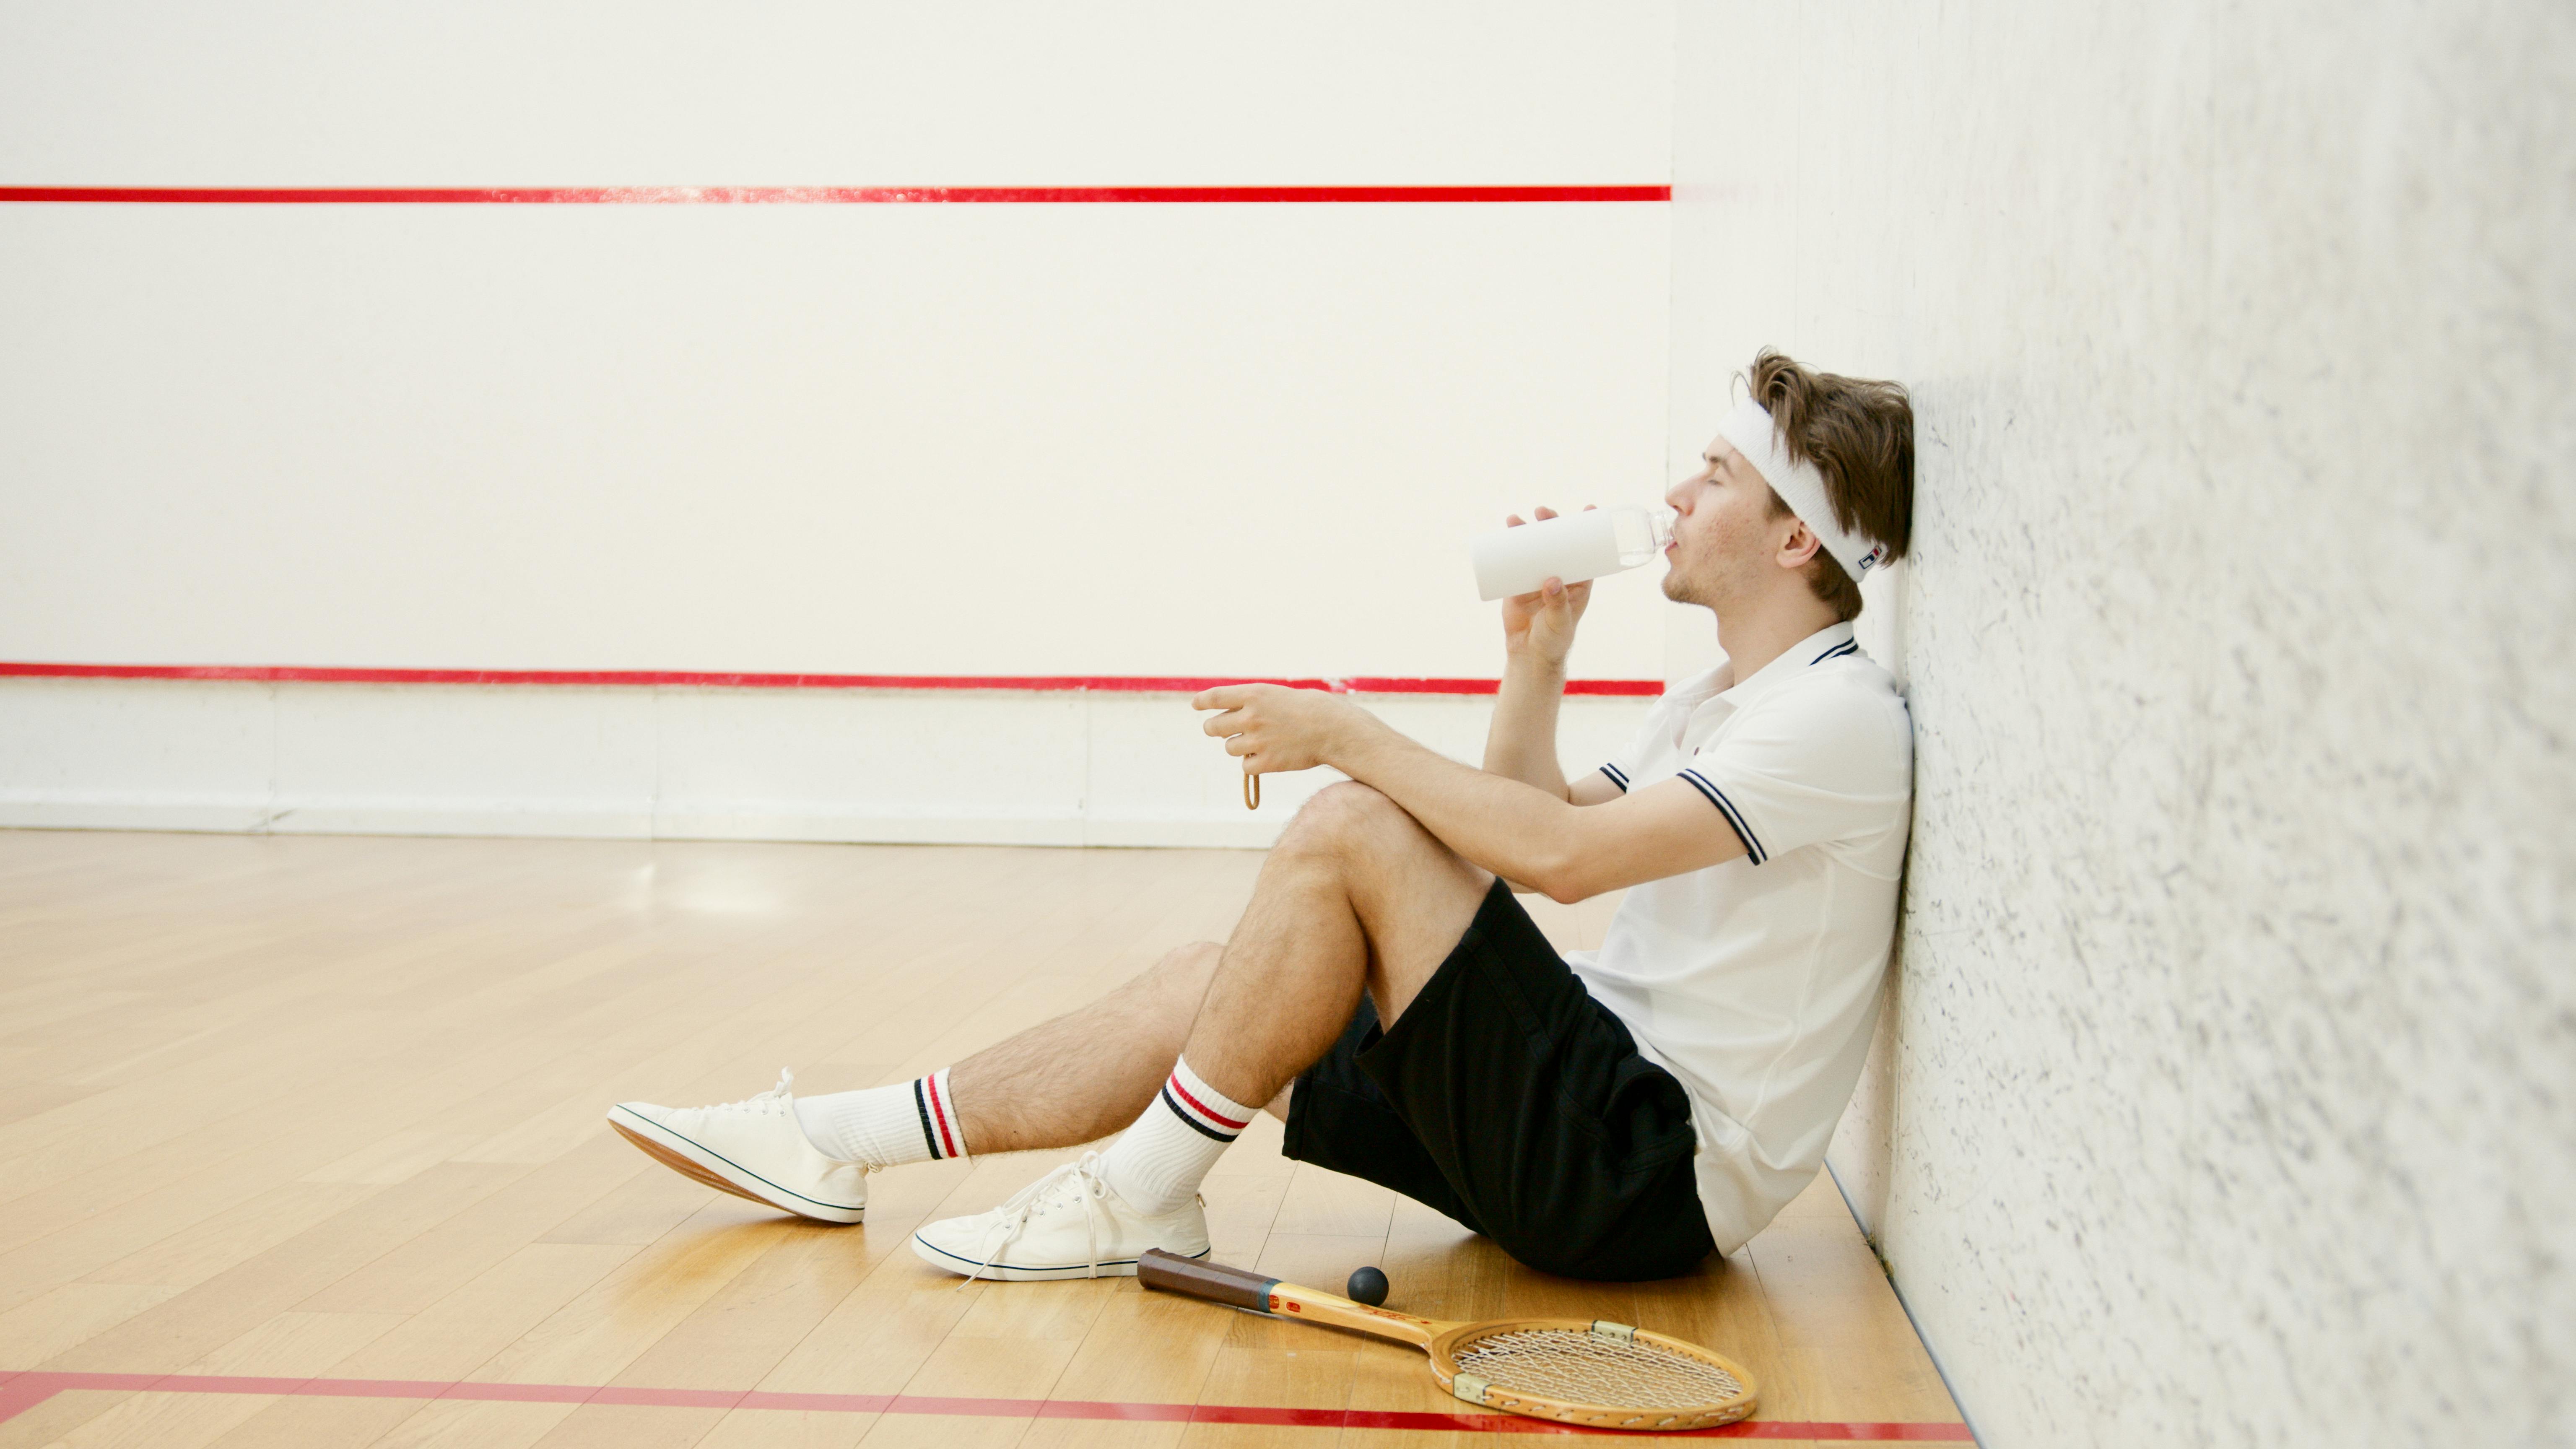 side view of a squash player drinking water while resting